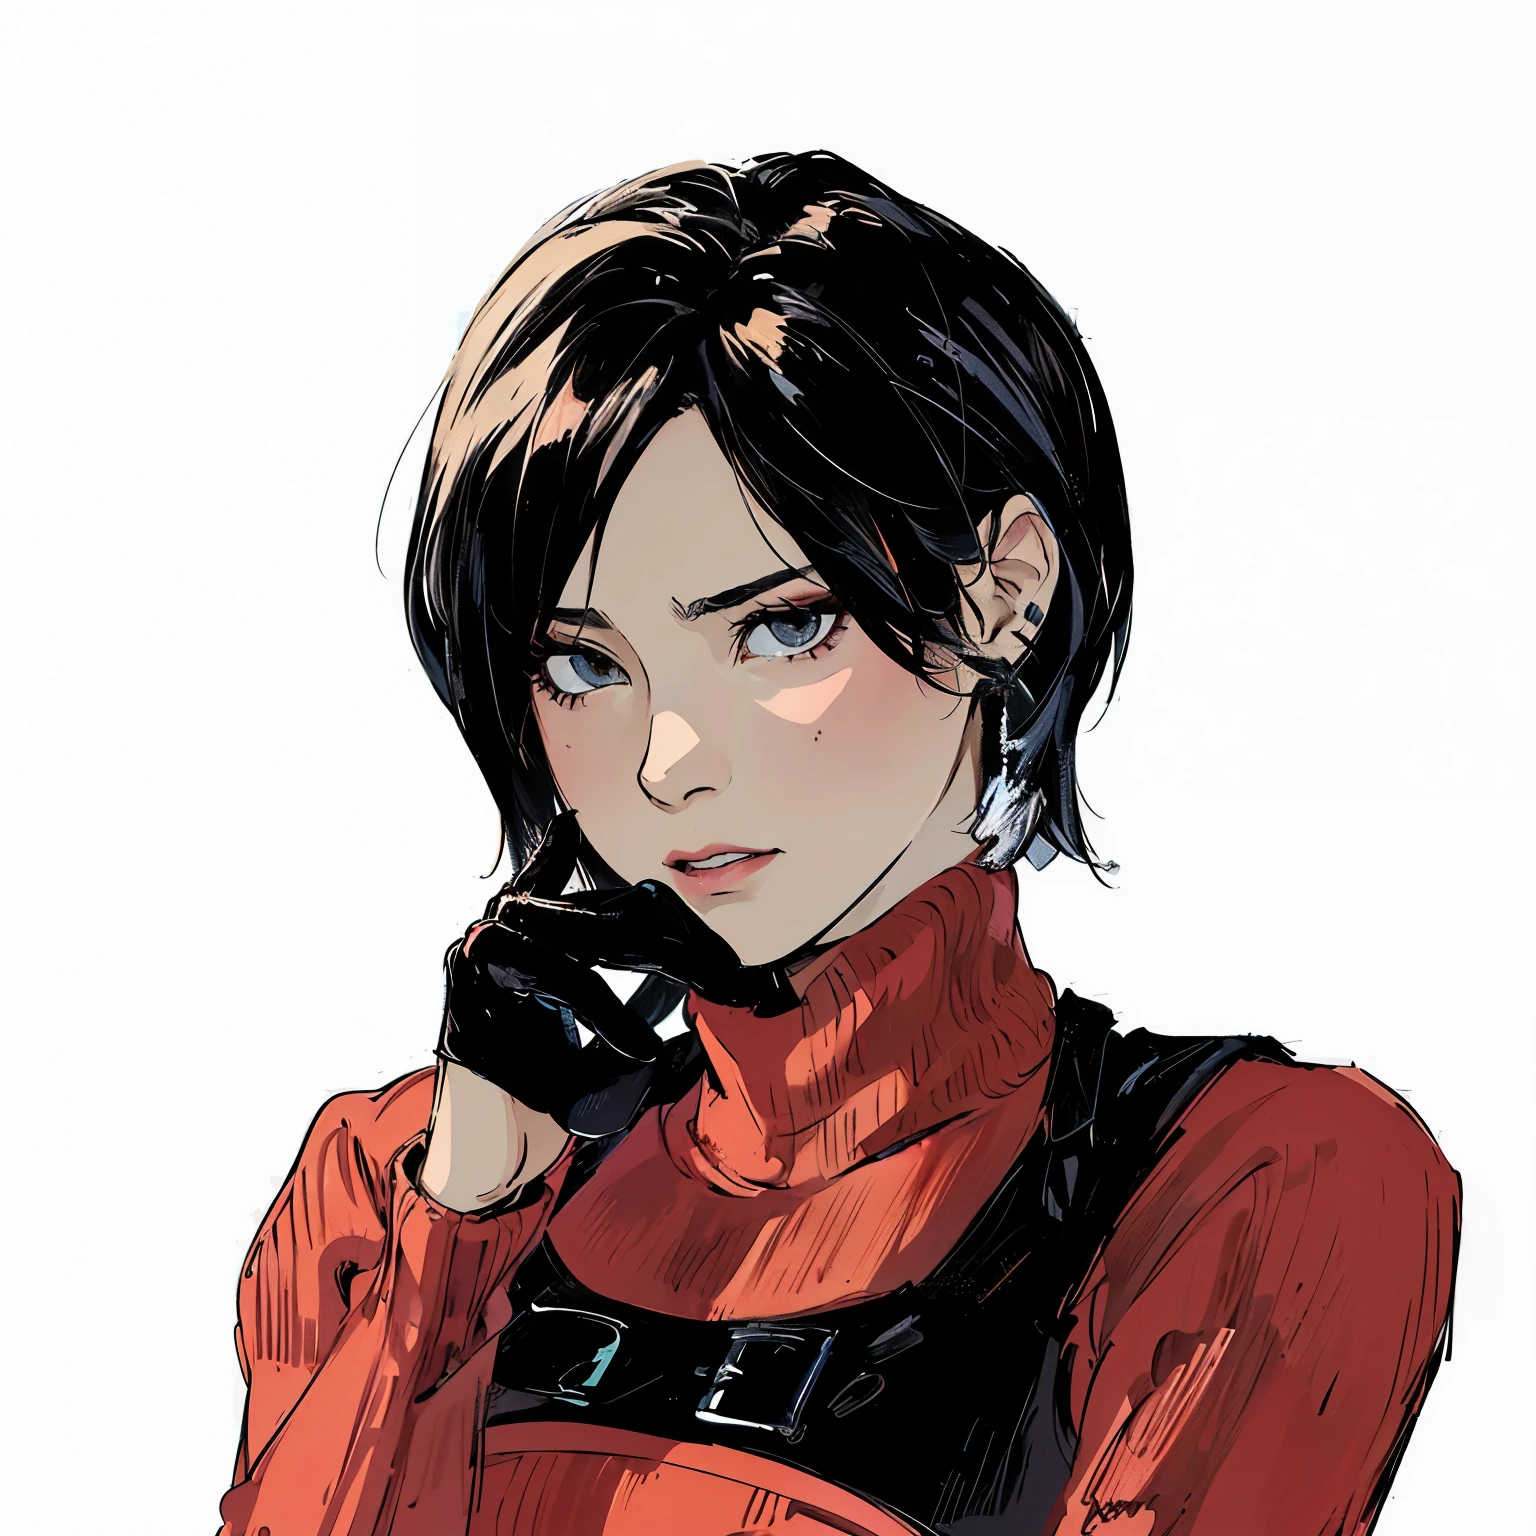 a drawing of a woman in a red shirt and black gloves, female protagonist 👀 :8, high quality color drawing, Direction: akihiko yoshida, satoshi kon art style, highly detailed exquisite fanart, yayoi kasuma, high quality fanart, Direction: Yoshihiko Wada, female protagonist, By Yasutomo Oka, Direction: Jason Teraoka, by Miyamoto